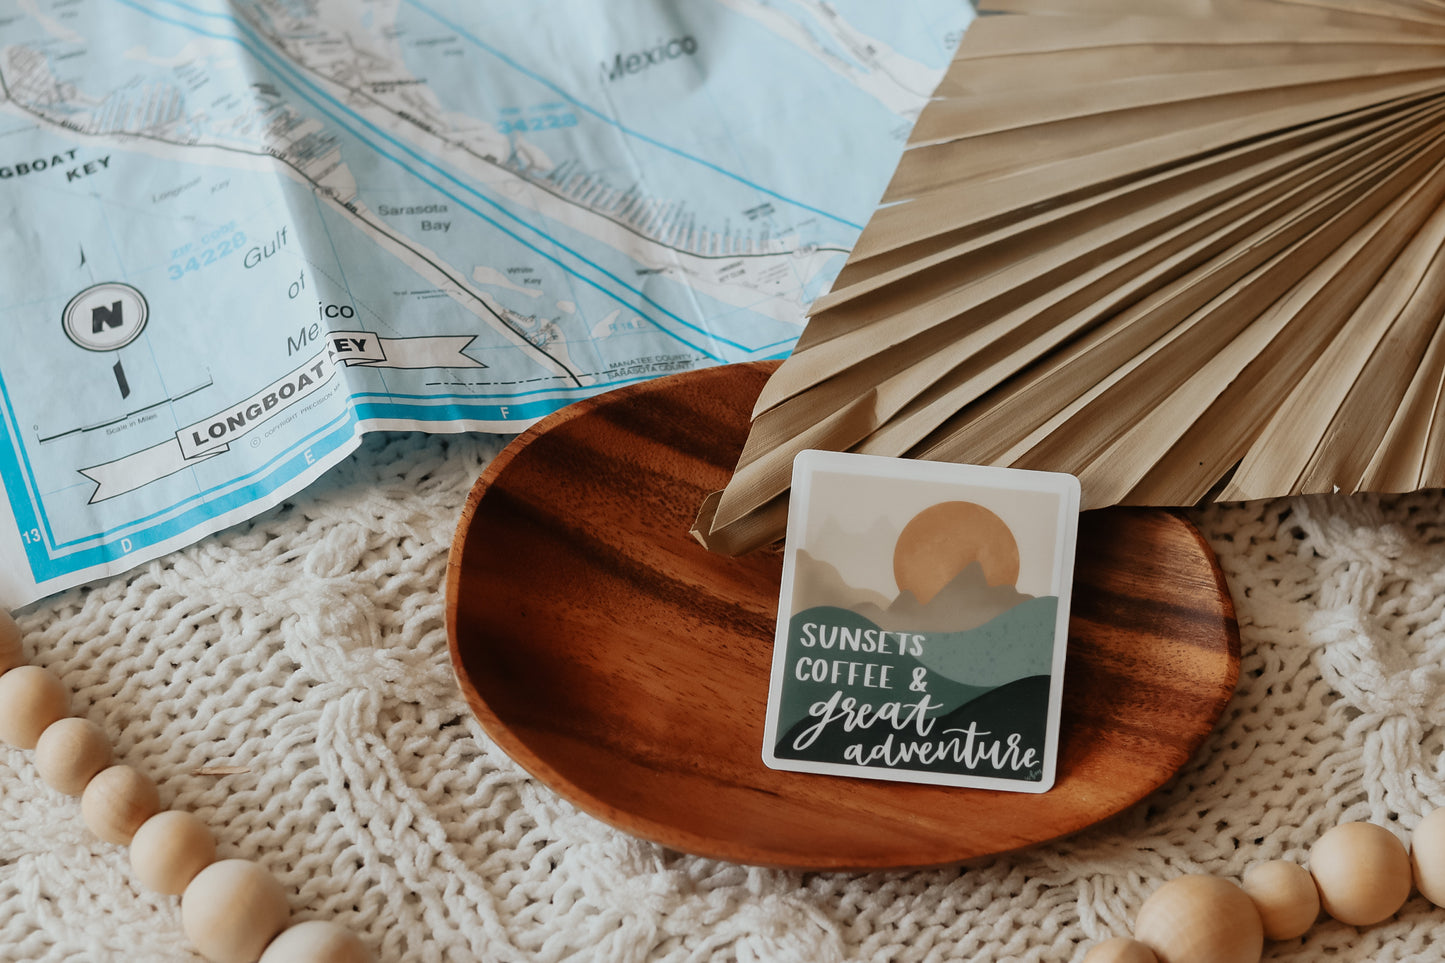 "Sunsets, coffee, and great adventure" 3 x 3 handlettered clear sticker